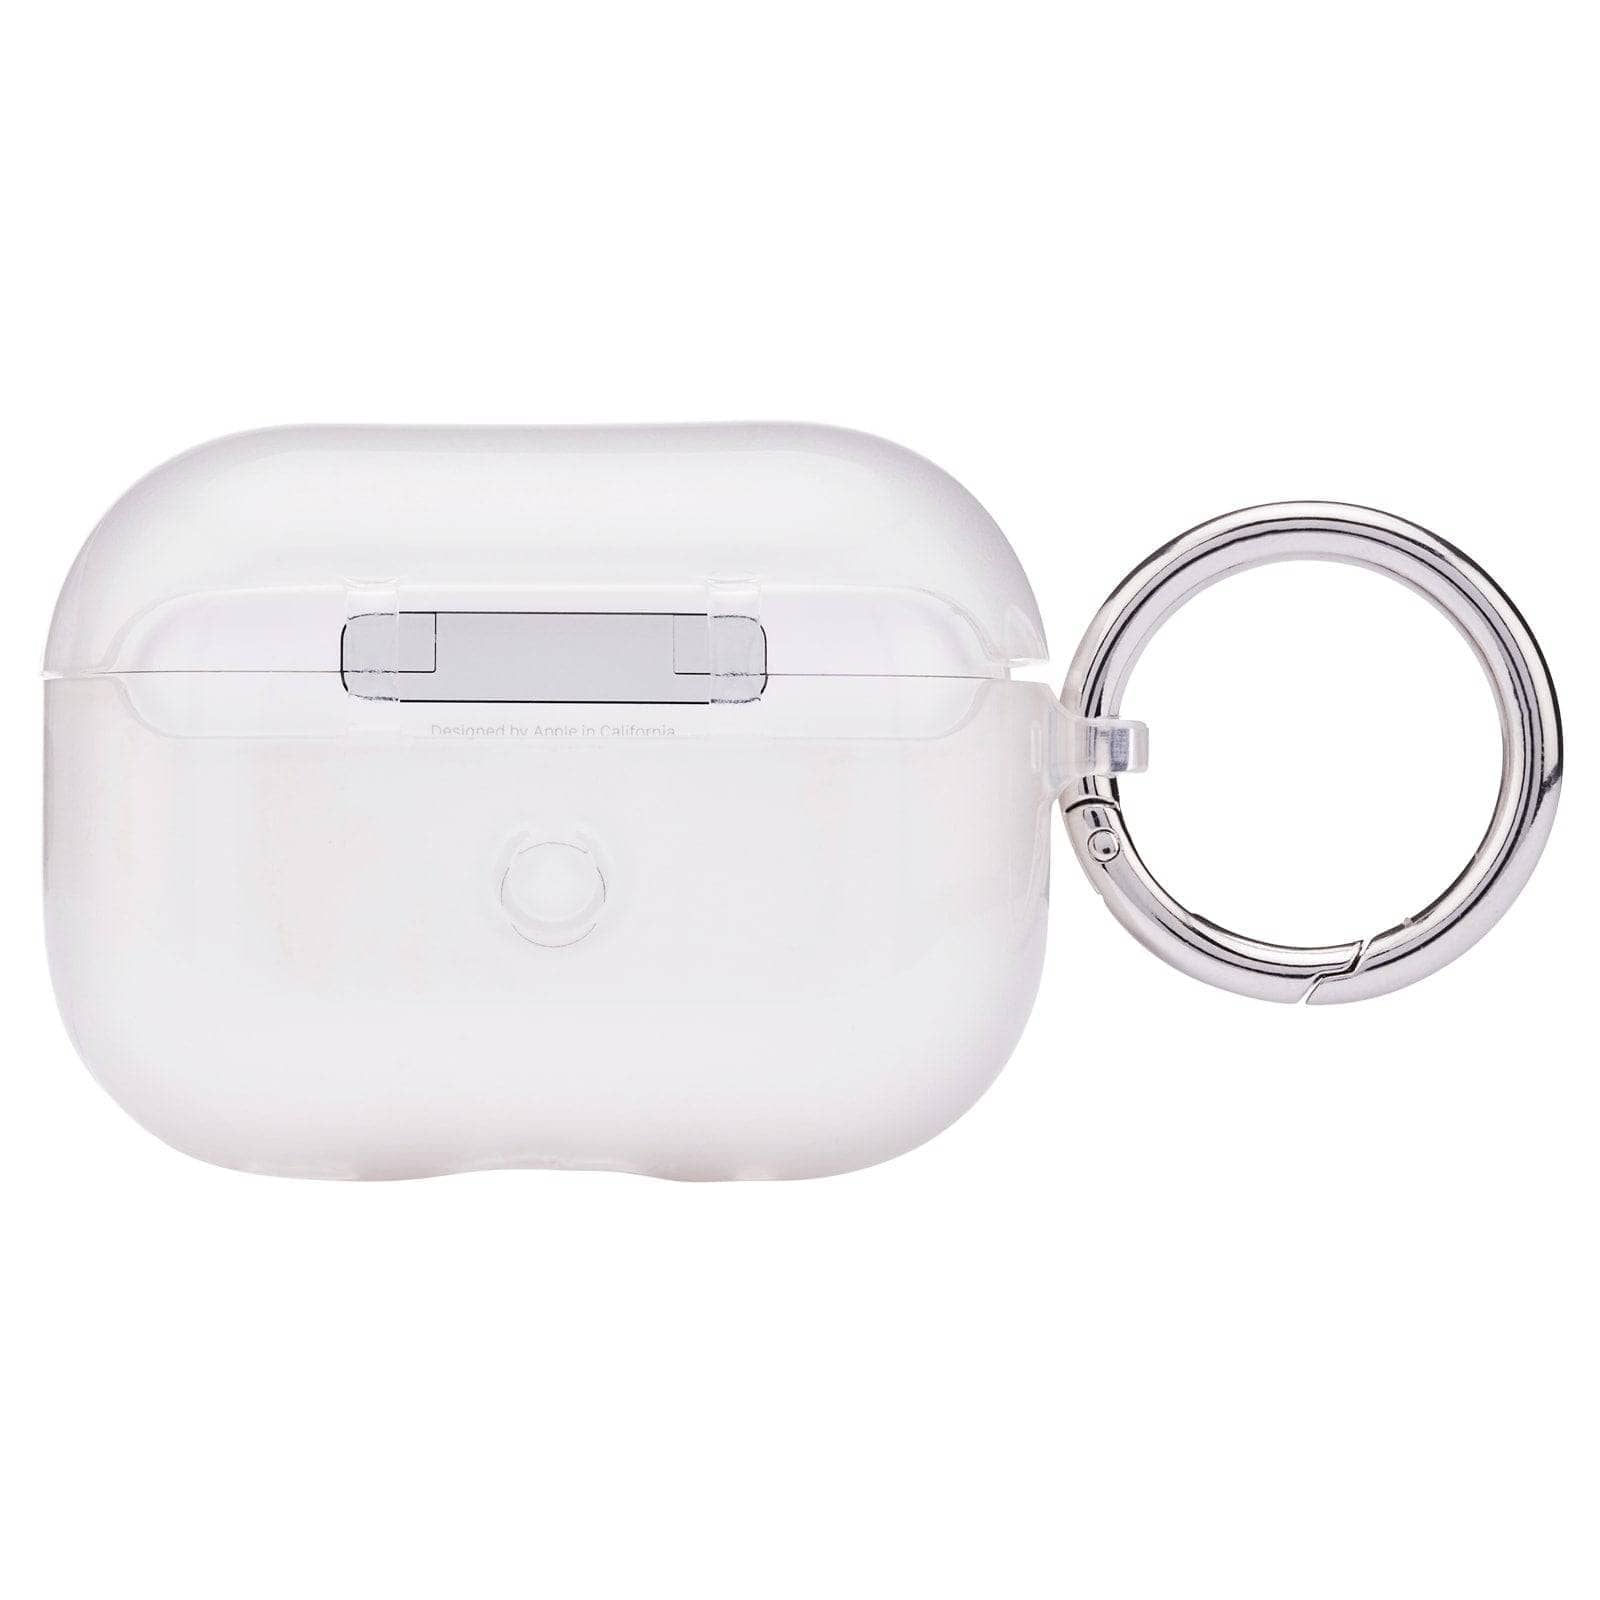 Case-Mate Twinkle Case with Ring Clip - For Airpods Pro/Pro (2nd Gen) - Twinkle-Add On Accessories - Air Pod Accesories-CASE-MATE-www.PhoneGuy.com.au